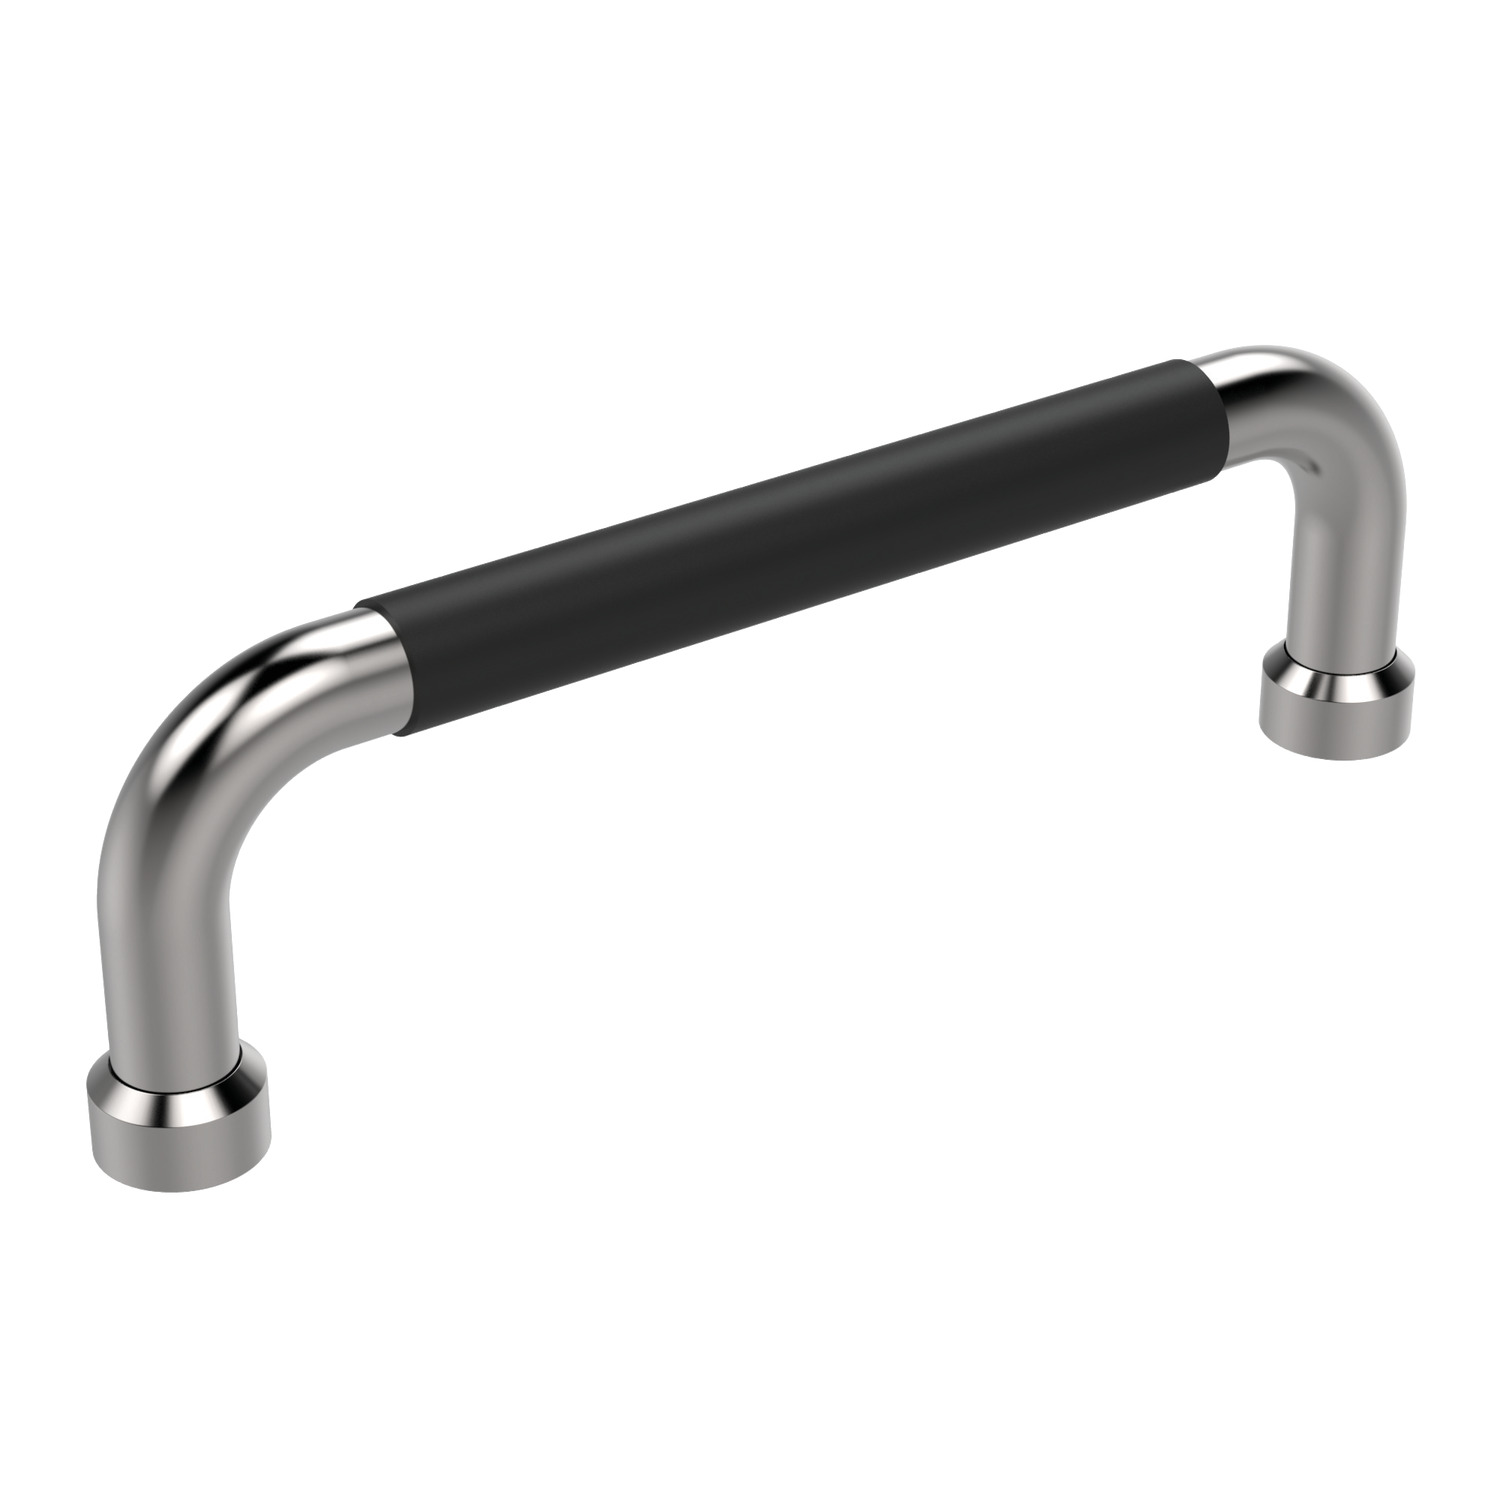 Product 78740, Pull Handles with Plastic Cover steel / 